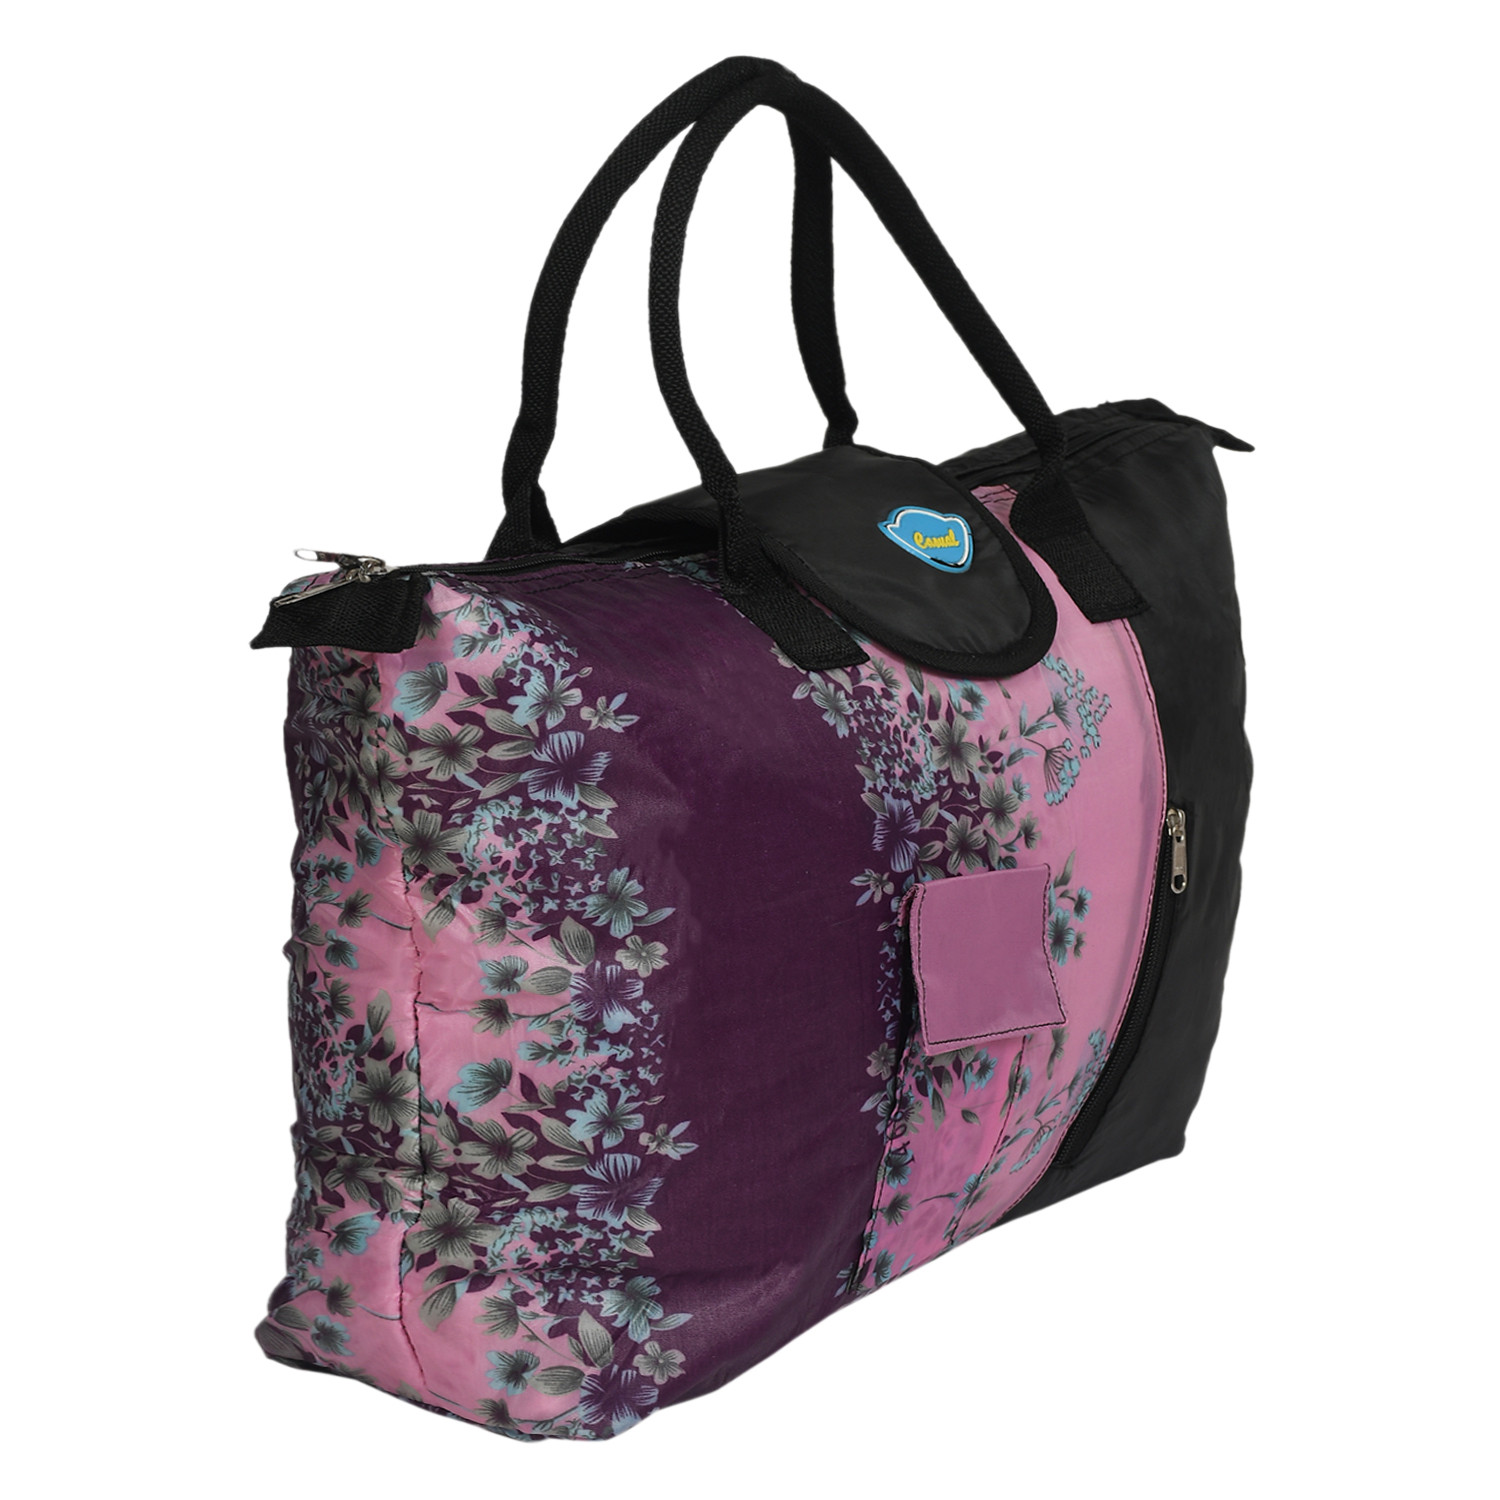 Kuber Industries Parachute Floral Print Shoulder Bag/Shopping Bag For Home & Travling With Handle (Pink) 54KM4194